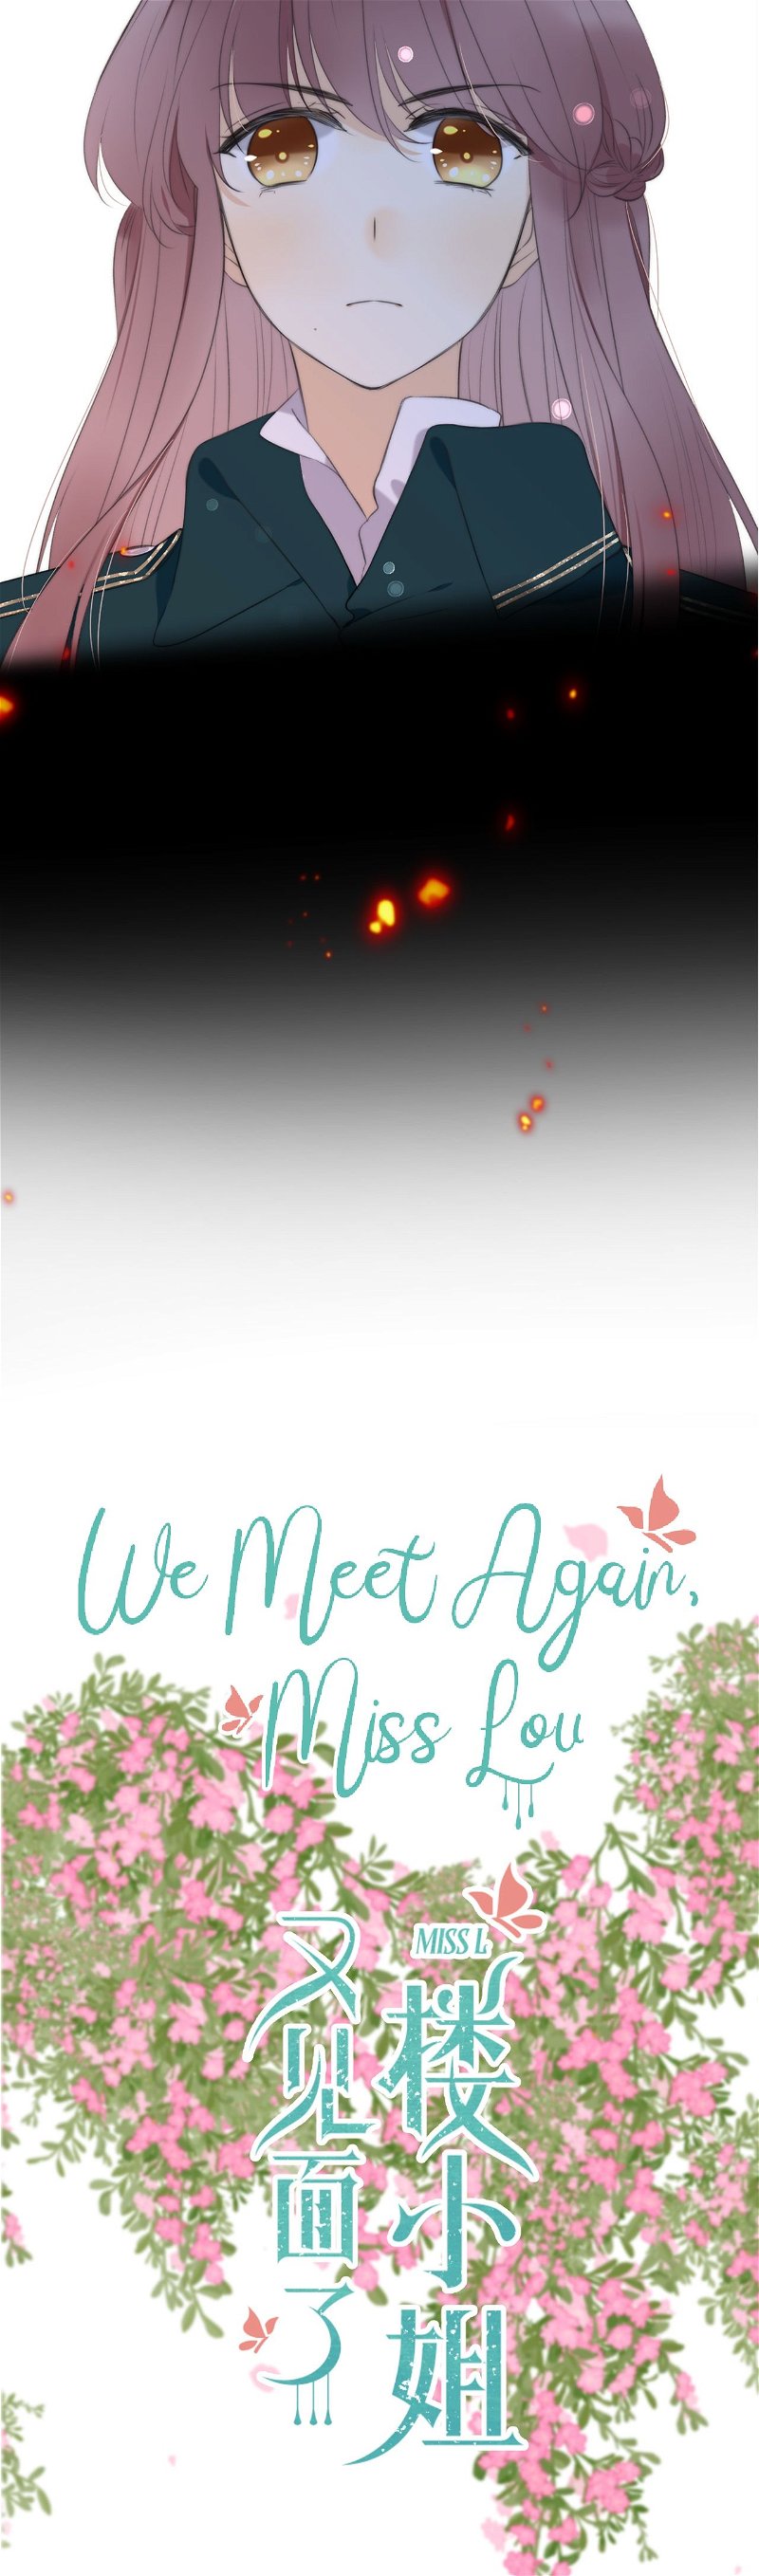 We Meet Again, Miss Lou Chapter 18 - Page 2